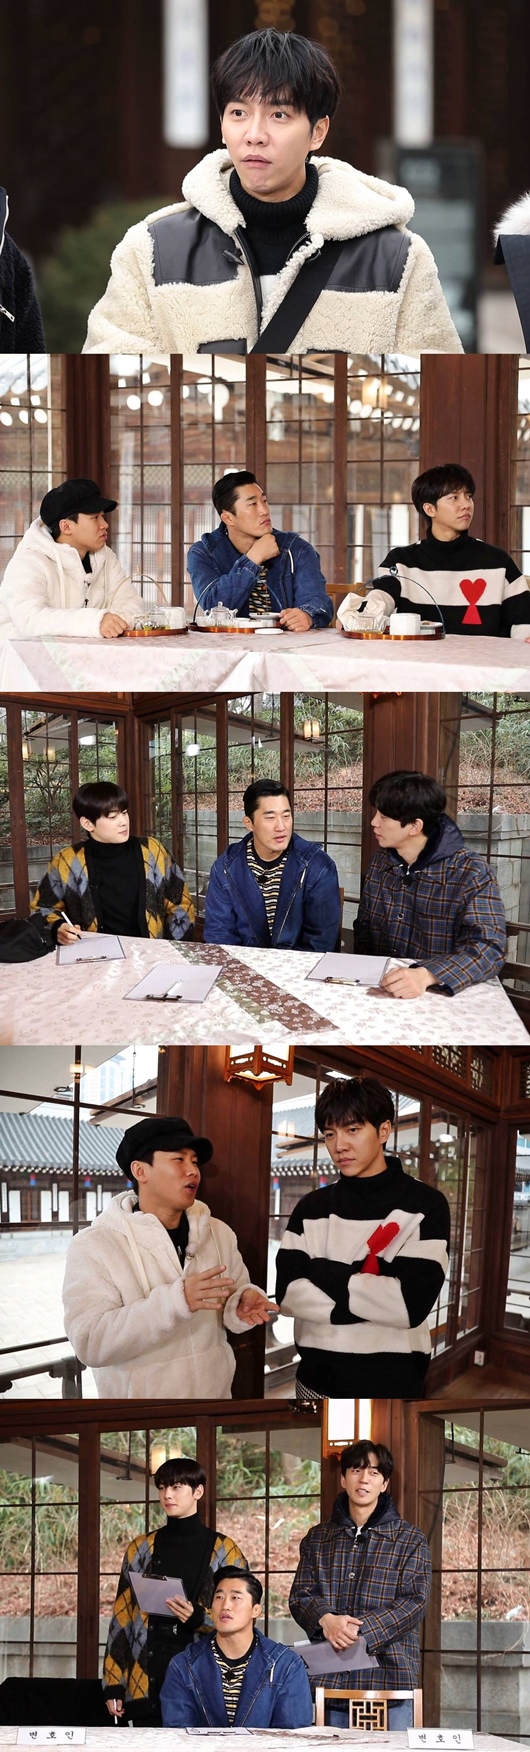 SBS All The Butlers, which will be broadcast on January 17, will feature Master of Korea with Blue Eyes, Lawyer of the largest law firm in Korea.The show will feature a Korean Firstone Tire and Rubber Company foreign master nicknamed Korea in Blue Eyes.The master raises curiosity by saying that he has as many as three titles, from Lawyer, the largest law firm in Korea, to Chairman of the Foundation of Non-Profit Welfare Organizations, and Chairman of the American Chamber of Commerce in Korea.The master said, I met with President Kim Dae-jung once a month to talk about economic revitalization. He also caught the eye by revealing that he was a Lawyer who defended Park Jong-woo, who was in danger of losing his bronze medal at the 2012 London Olympics.In addition, the master who visited Korea for the first time in 1971 is said to have focused his attention on Confessions, saying, I am afraid of Korea.The master of the self-styled title Koreas Al raises questions about why Korea is afraid.On the other hand, with the proposal of Master Lawyer, the members attracted attention because they turned Yang Se-hyeong, Shin Sung-rok and Cha Eun-woo into Lawyers with Top Model, Lee Seung-gi and Kim Dong-Hyun in the merger in the mock court.Lee Seung-gi, a giant company, and Kim Dong-Hyun, a start-up, are expected to gather their expectations by saying that they have worked hard with the common sense they know.The identity of the master of Korea Firestone Tire and Rubber Company, which has three titles, will be released on SBS All The Butlers broadcasted at 6:25 pm on the 17th.SBS